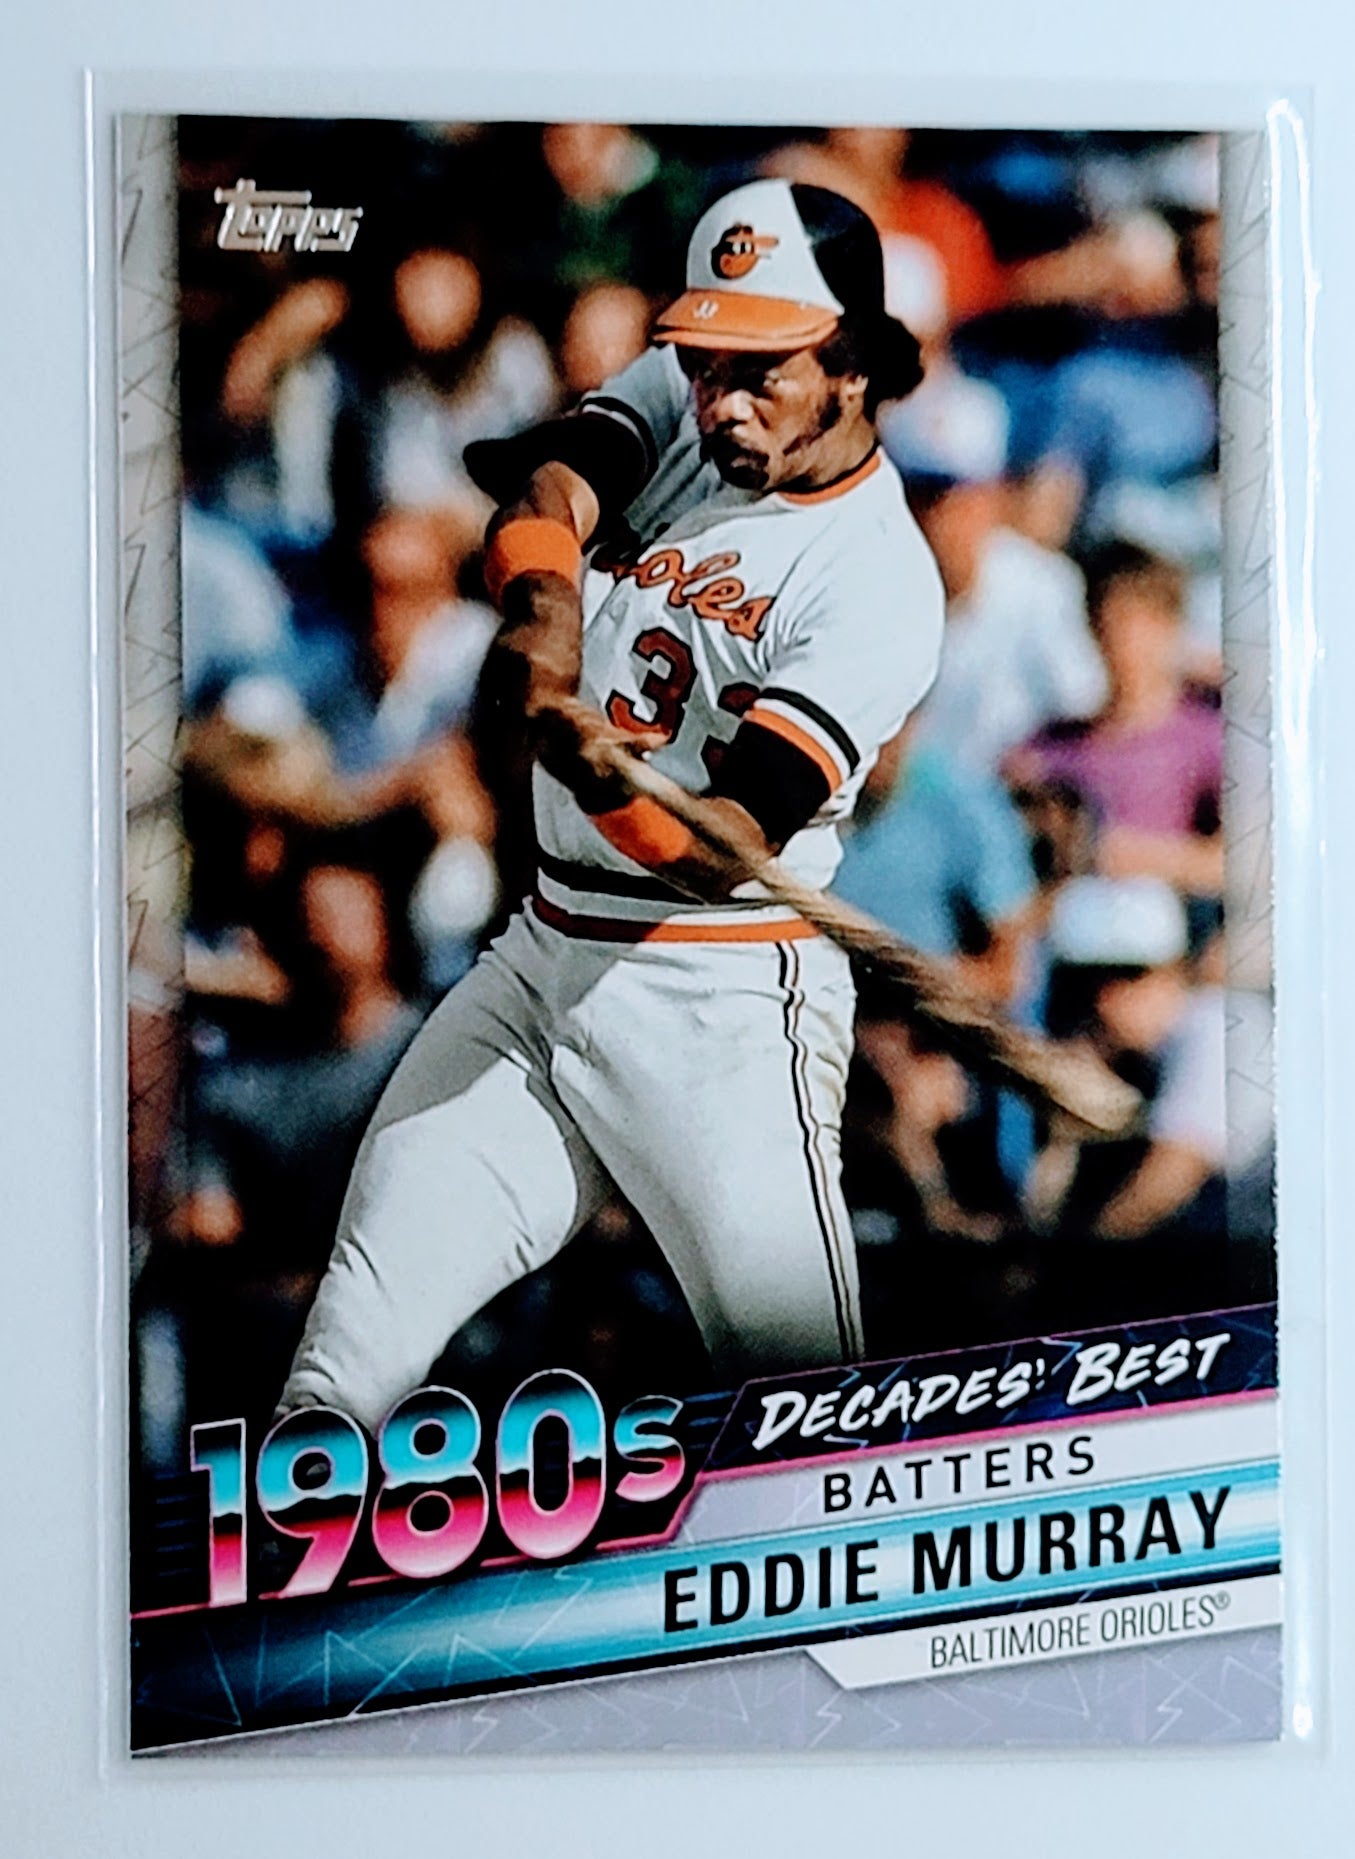 2020 Topps Eddie Murray
  Decades' Best Blue  Baseball Card  TH13C simple Xclusive Collectibles   